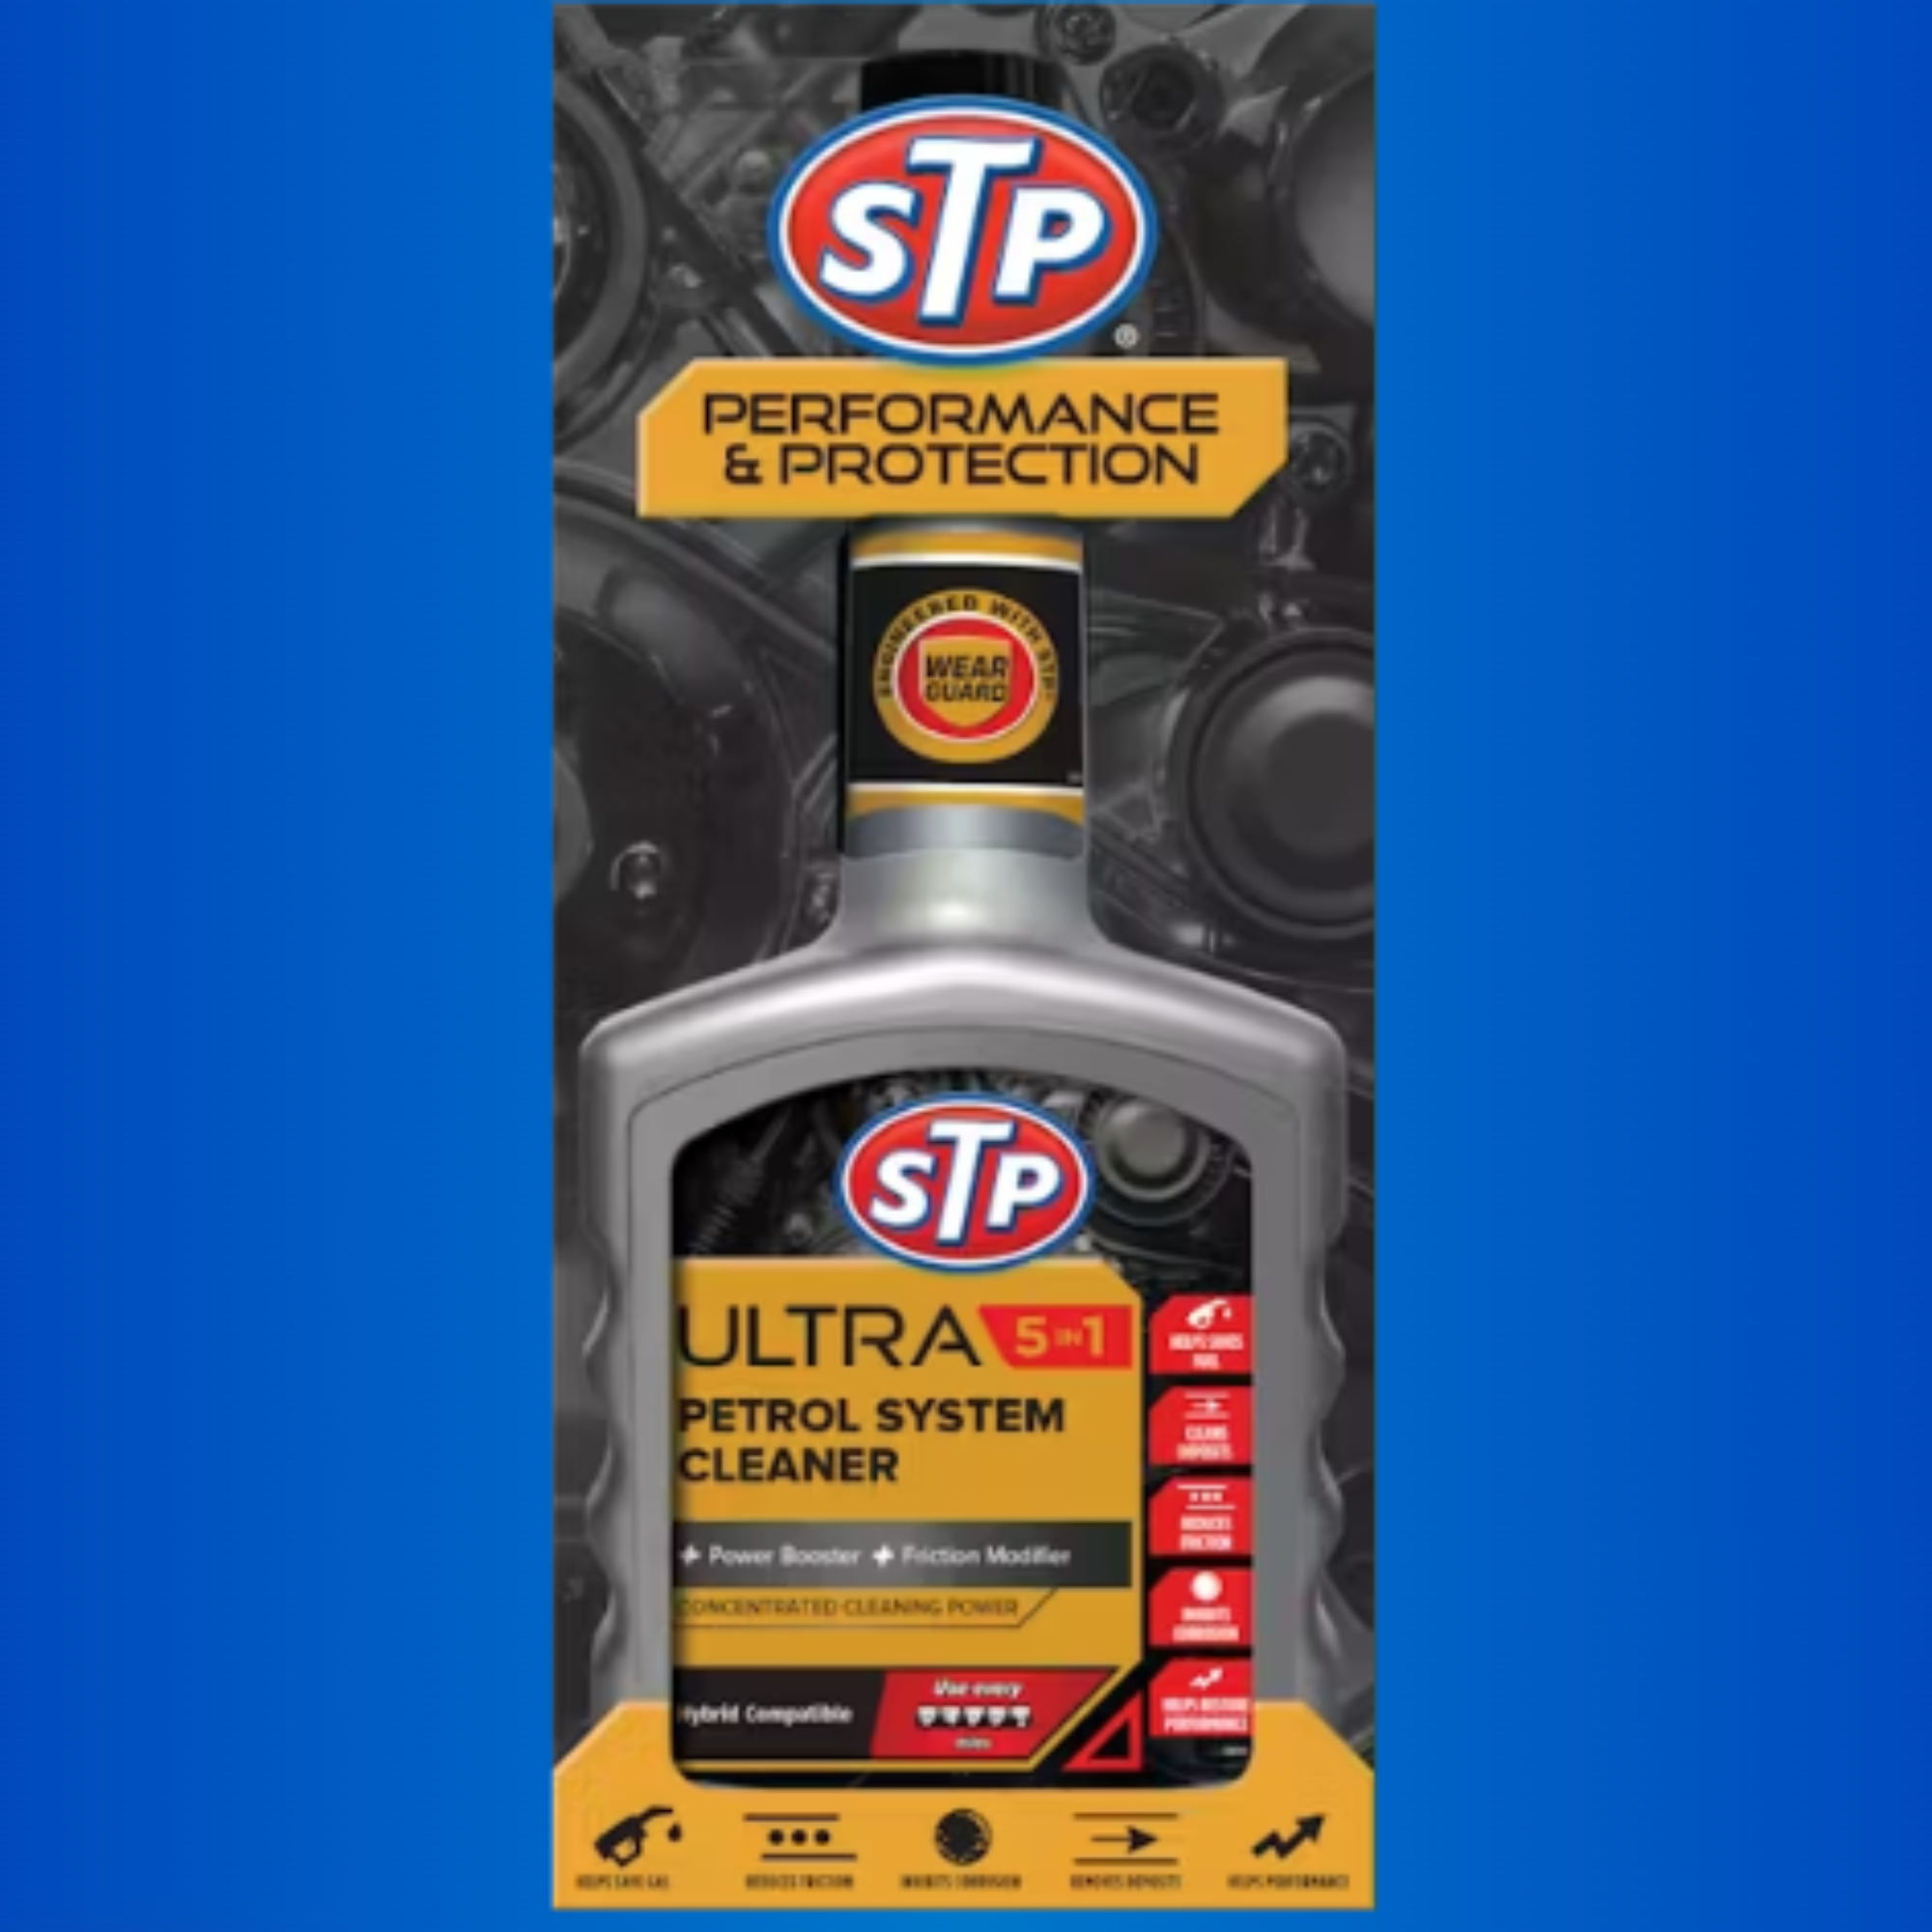 Stp Cleaning Power Ultra 5 In 1 Petrol System Cleaner 400 ml